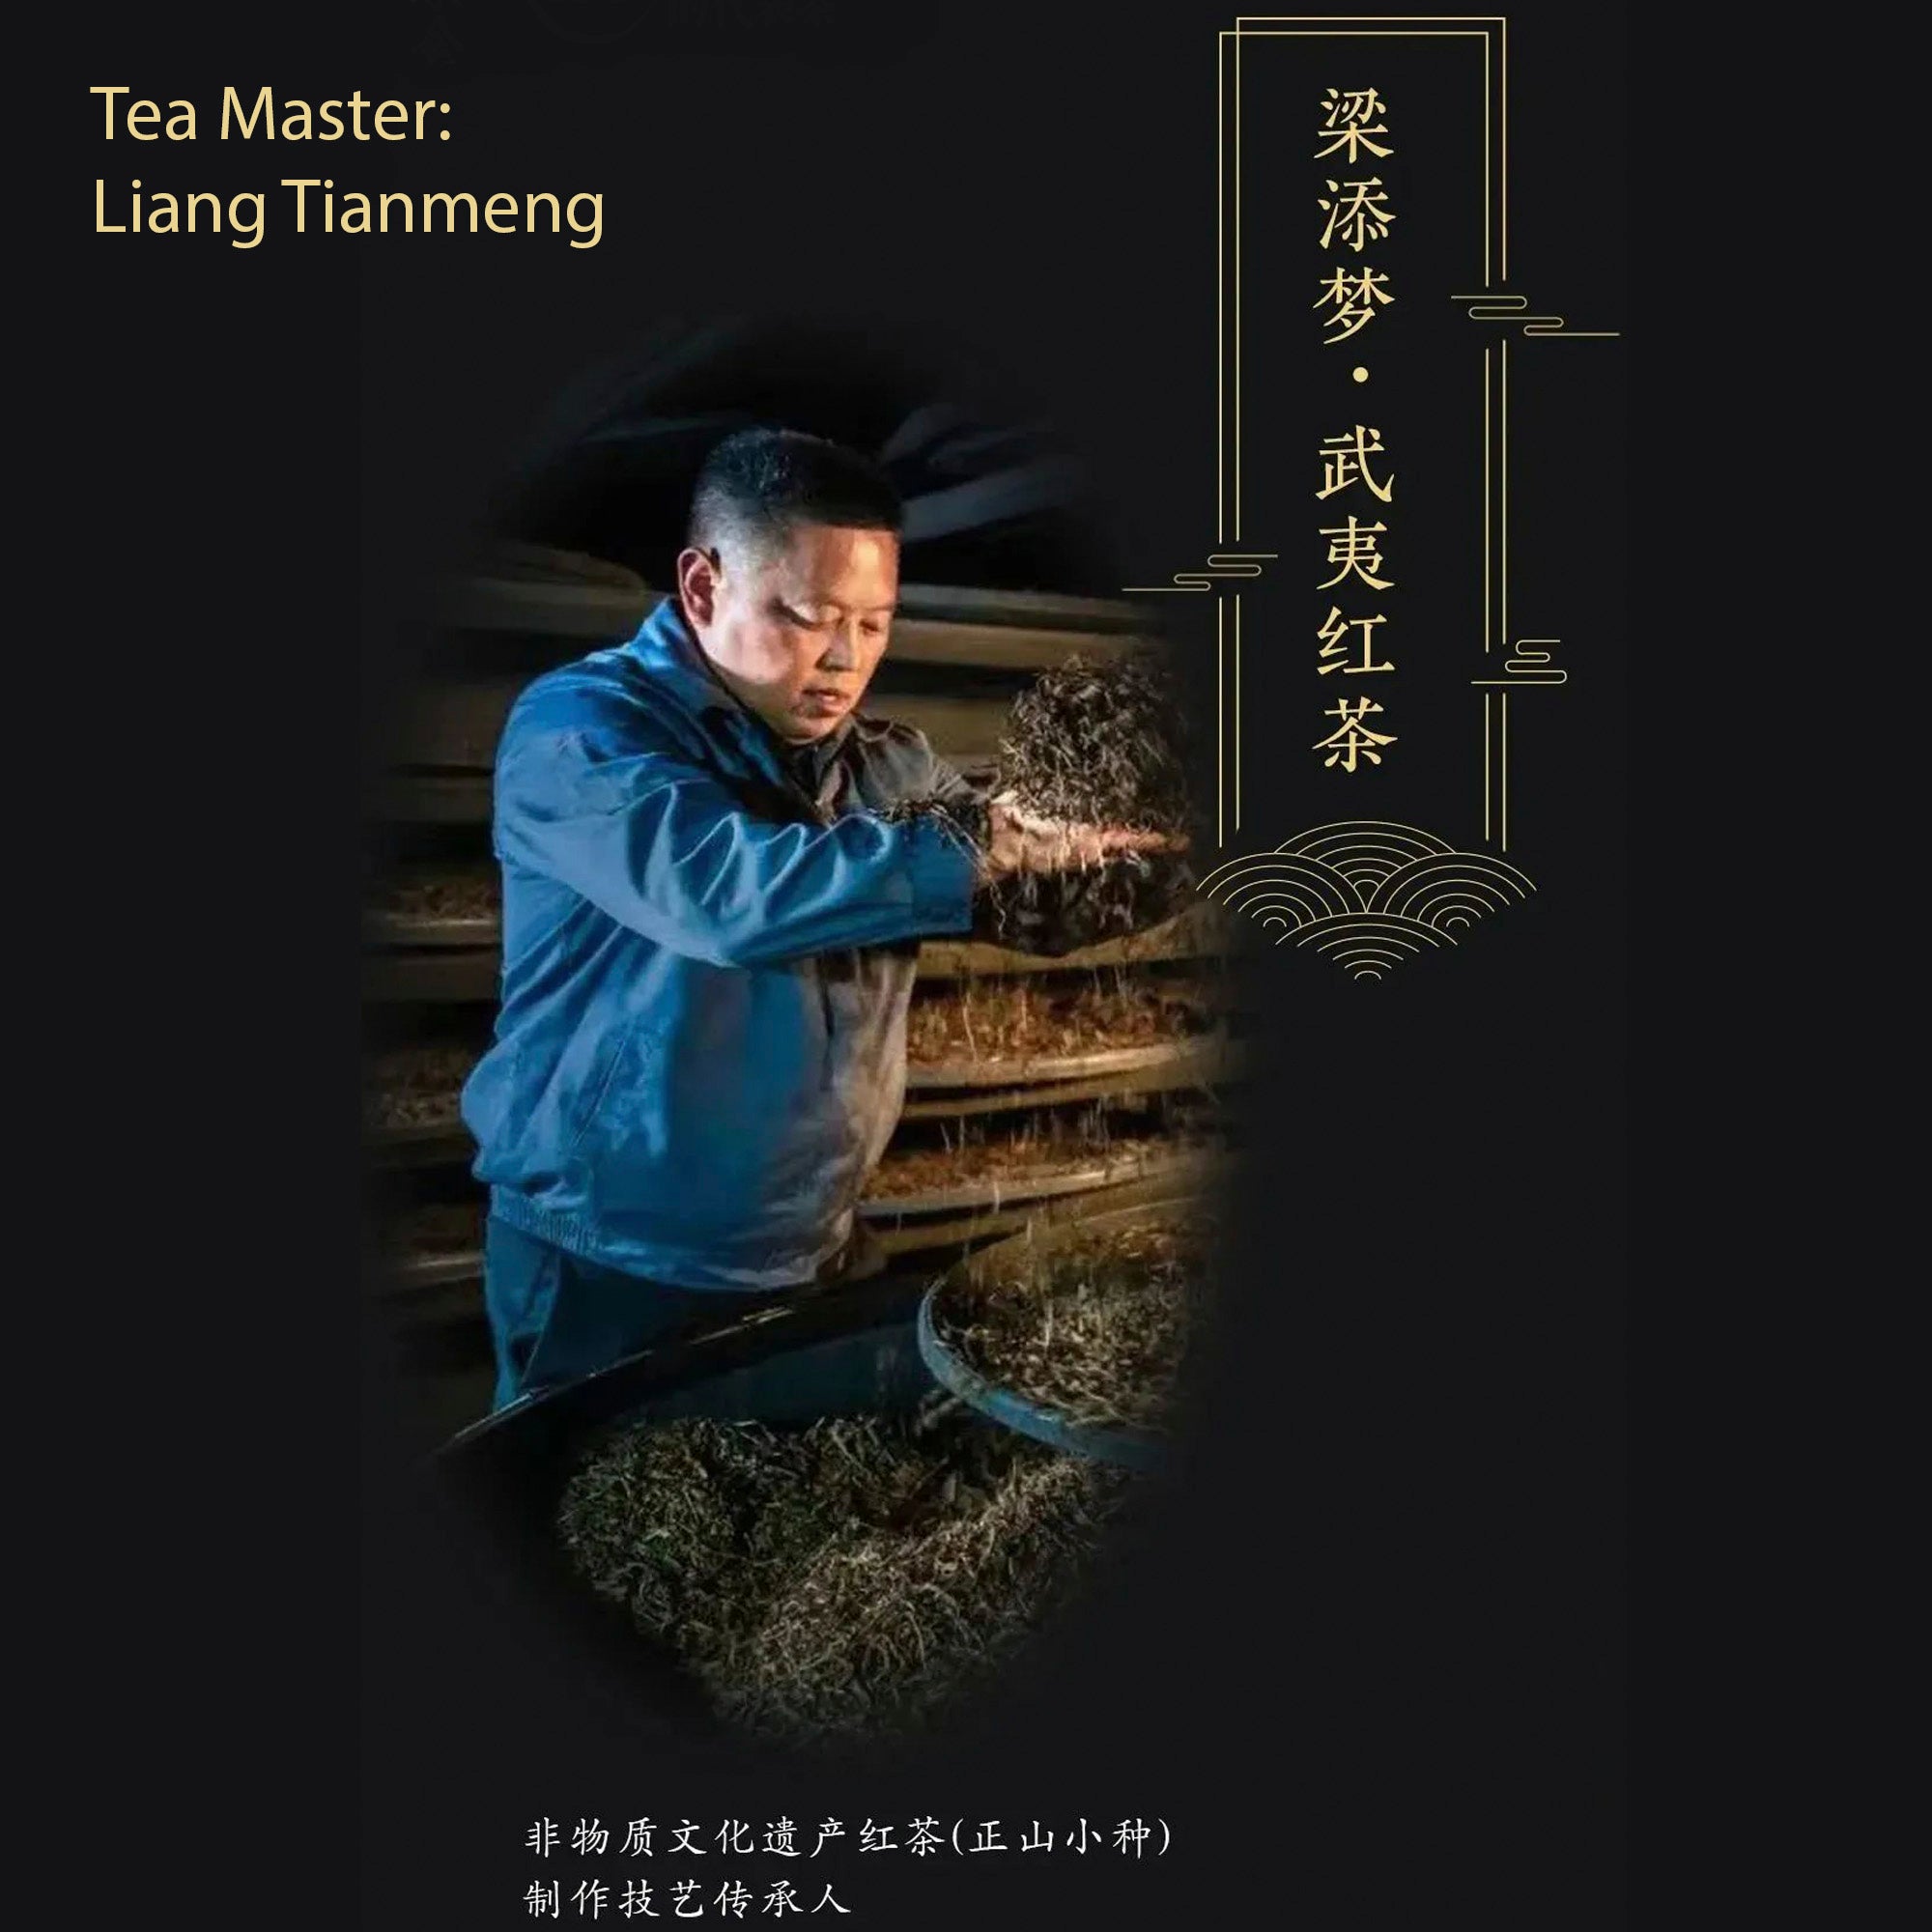 Special Tea Tasting: Master Liang's Wuyi Mountain Red Teas on 18th Nov. at 10am-12pm